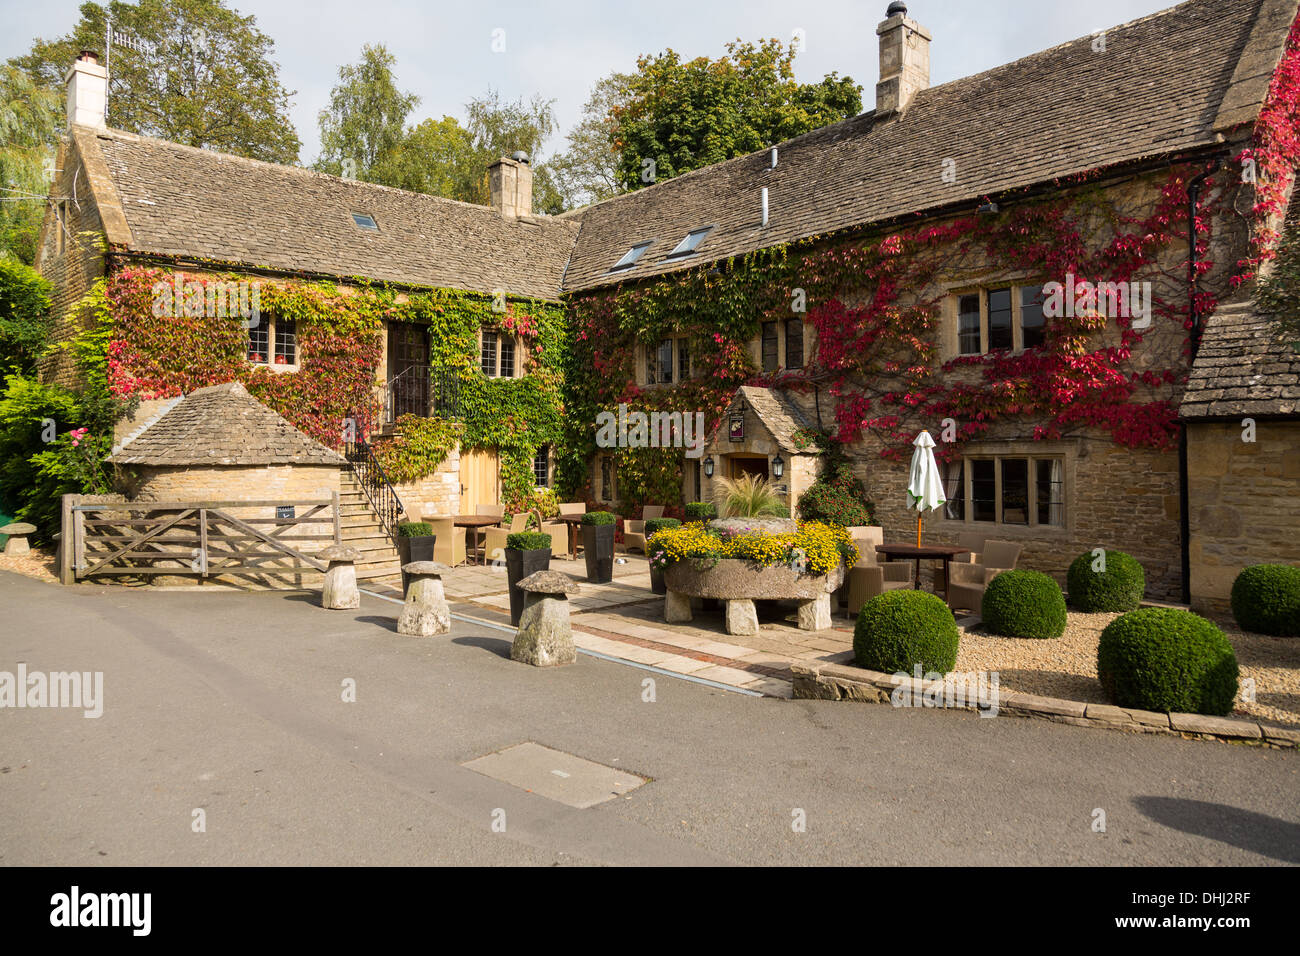 Le stragi Country Inn, Lower Slaughter, Cotswolds, Gloucestershire, England, Regno Unito Foto Stock